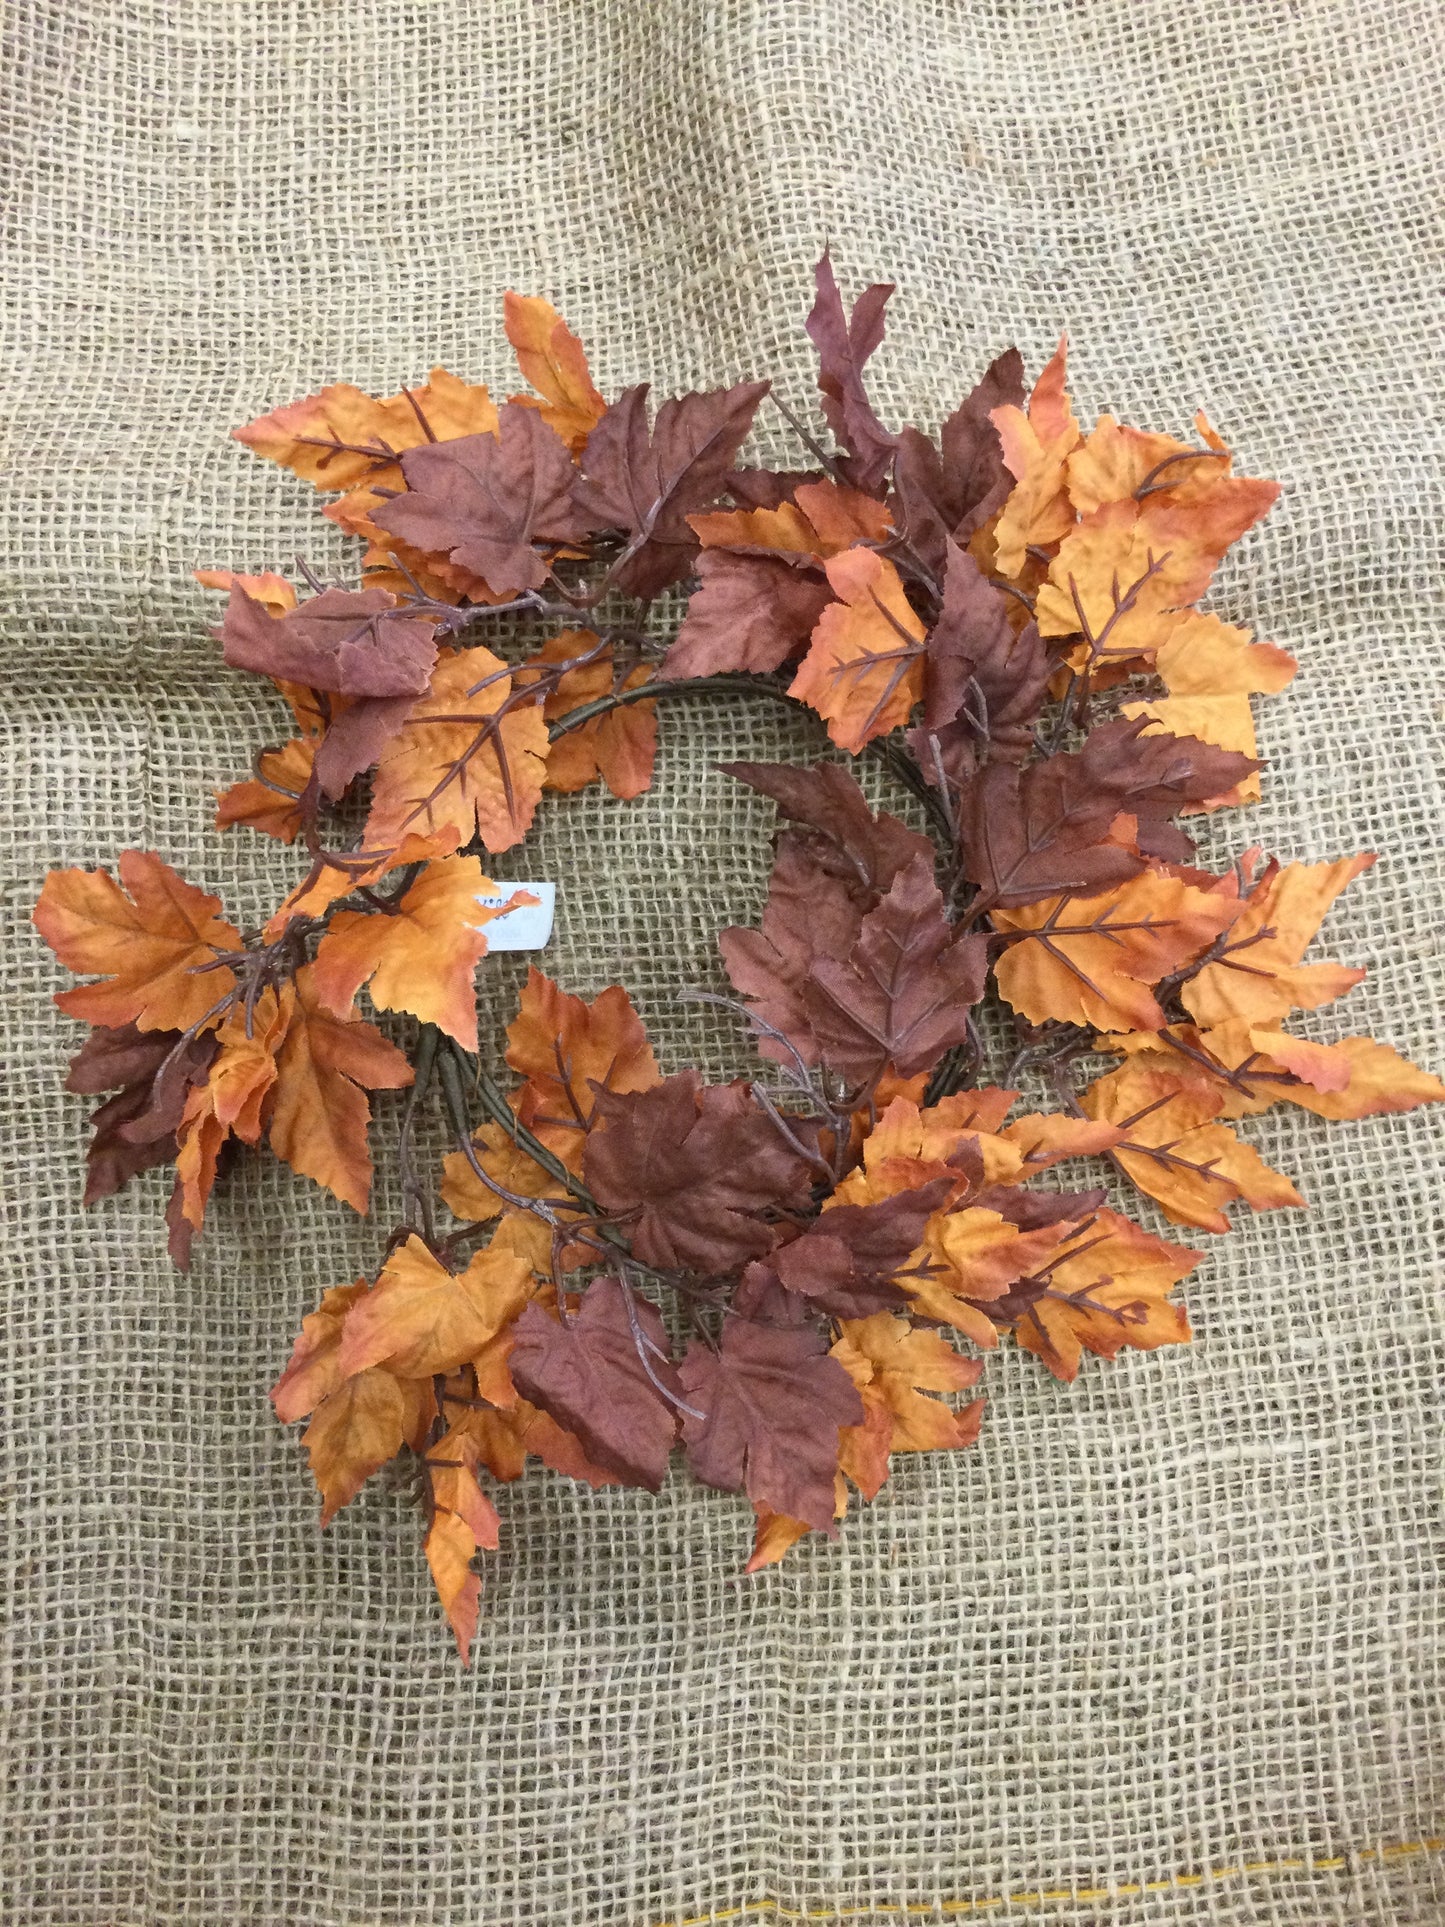 5" maple leaf candle ring